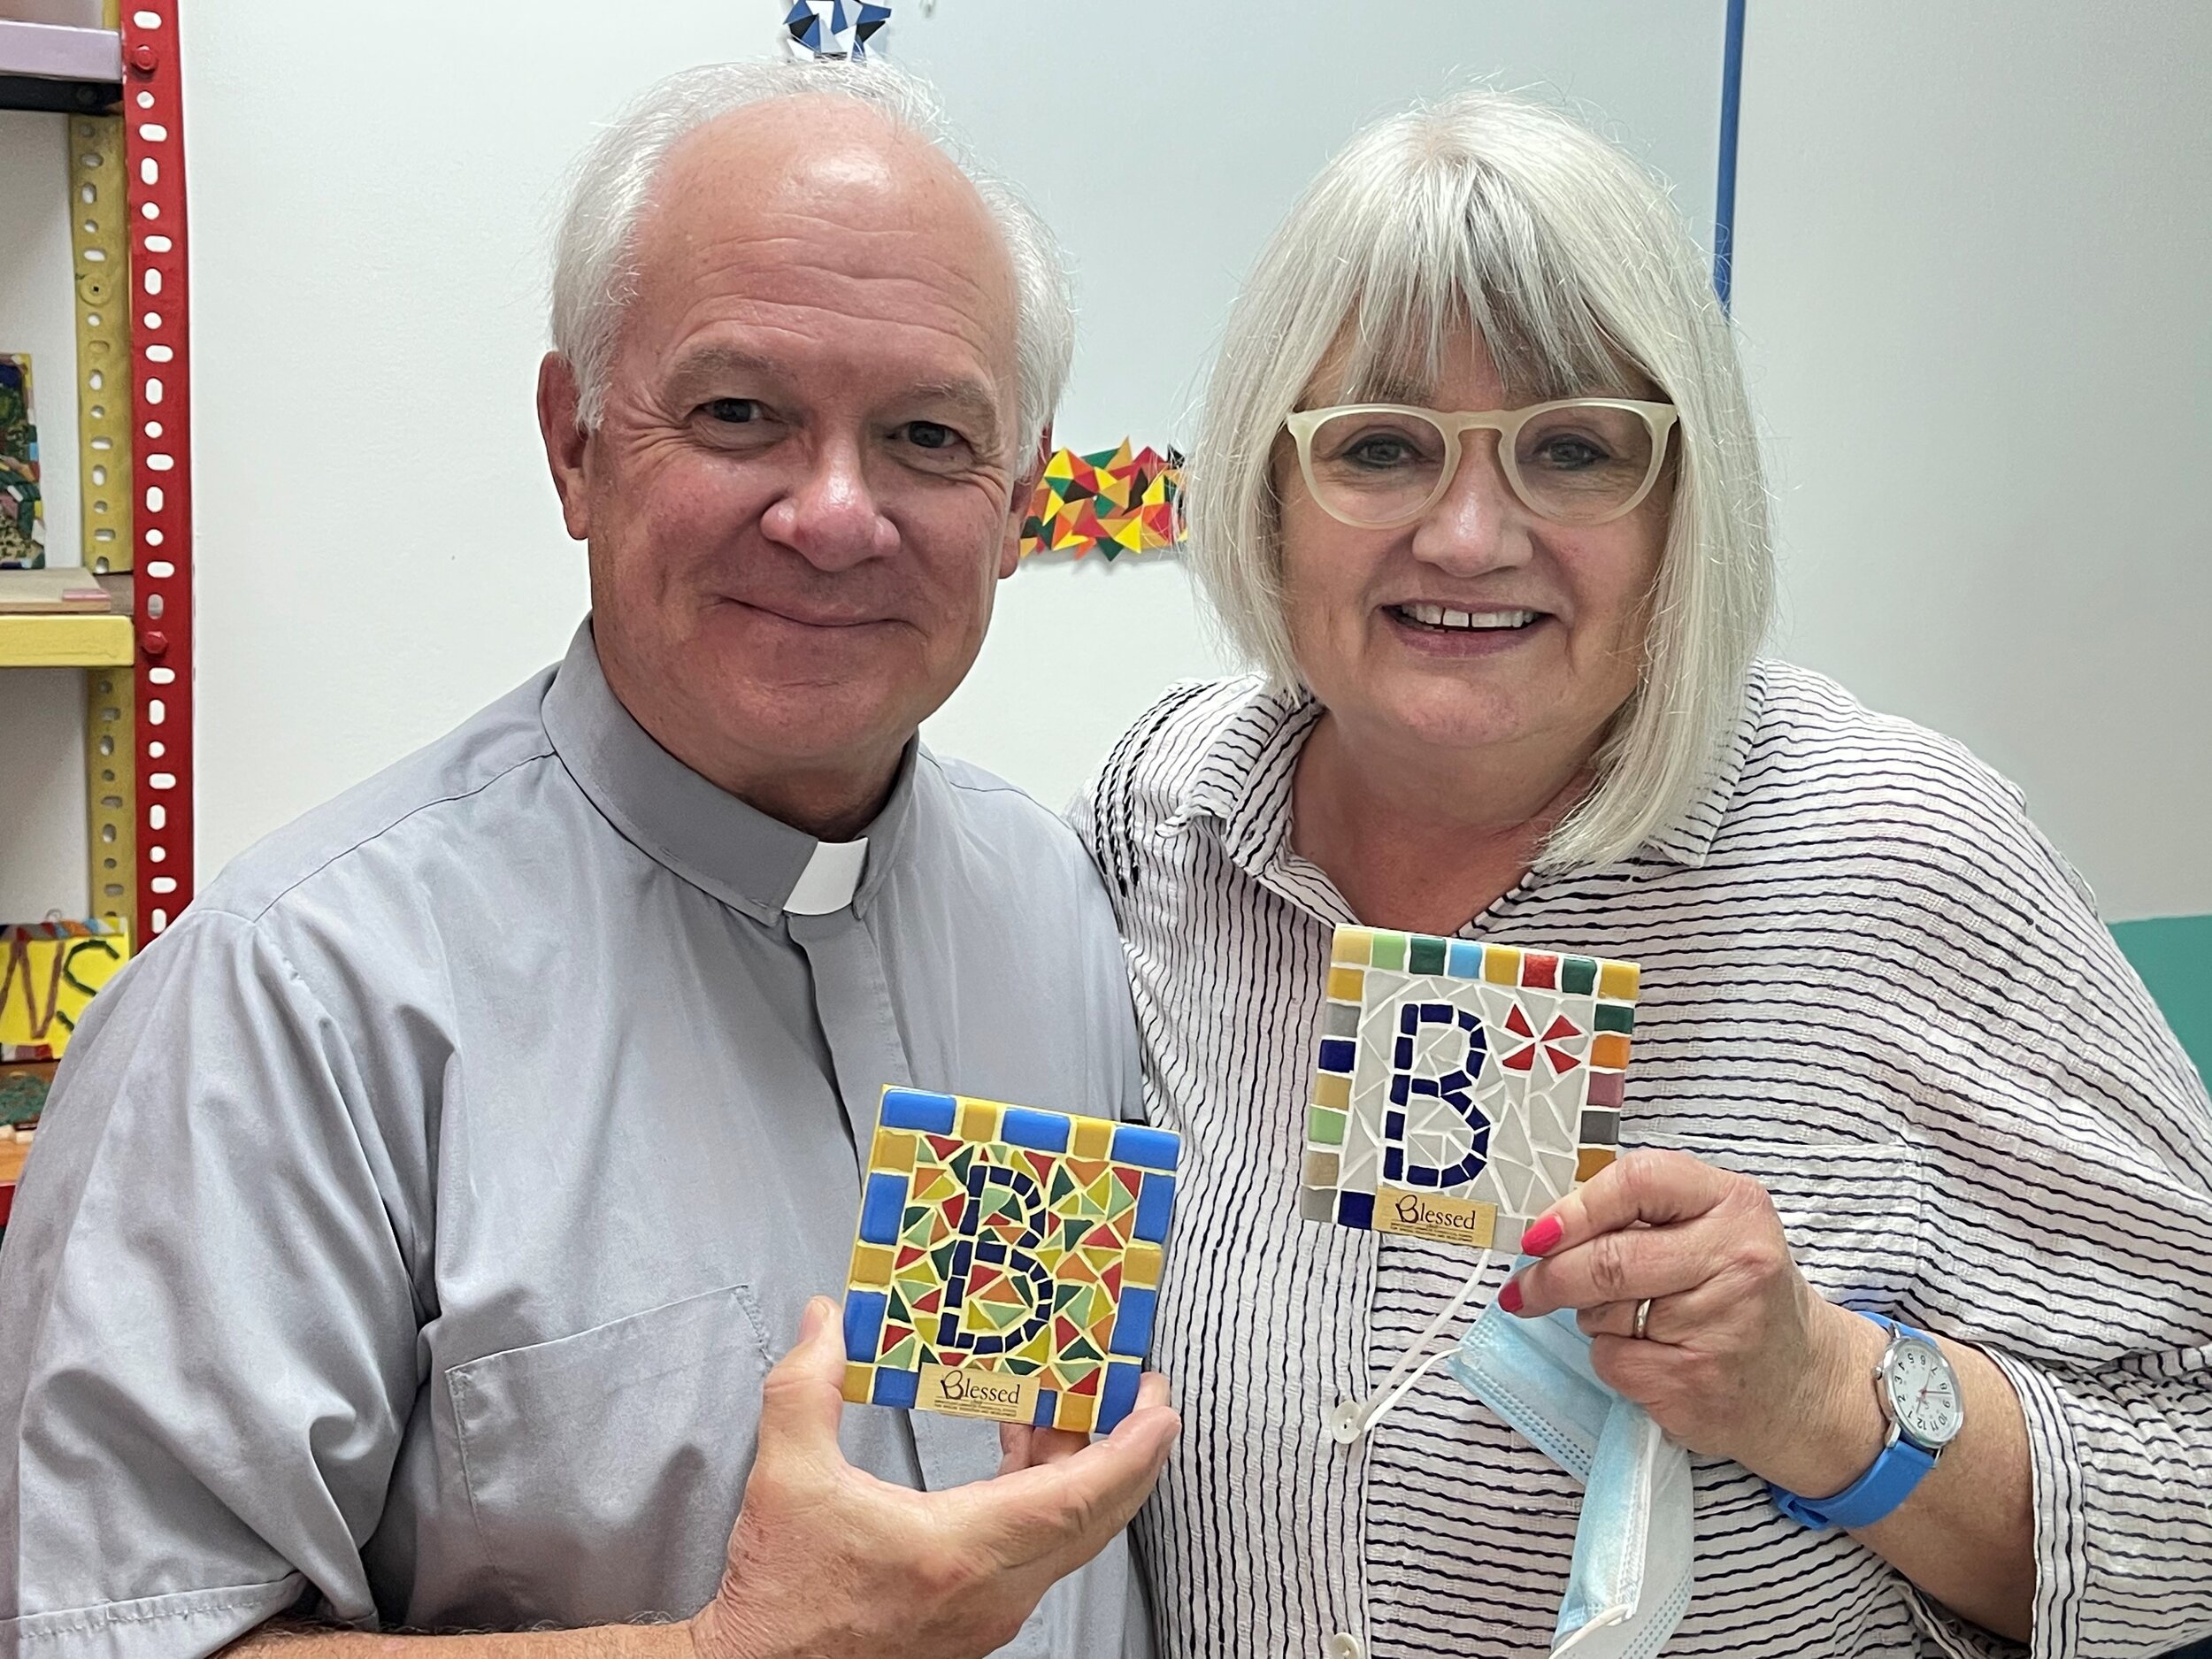  Jack and Marilyn found their initial mosaics made by Blessed students. 